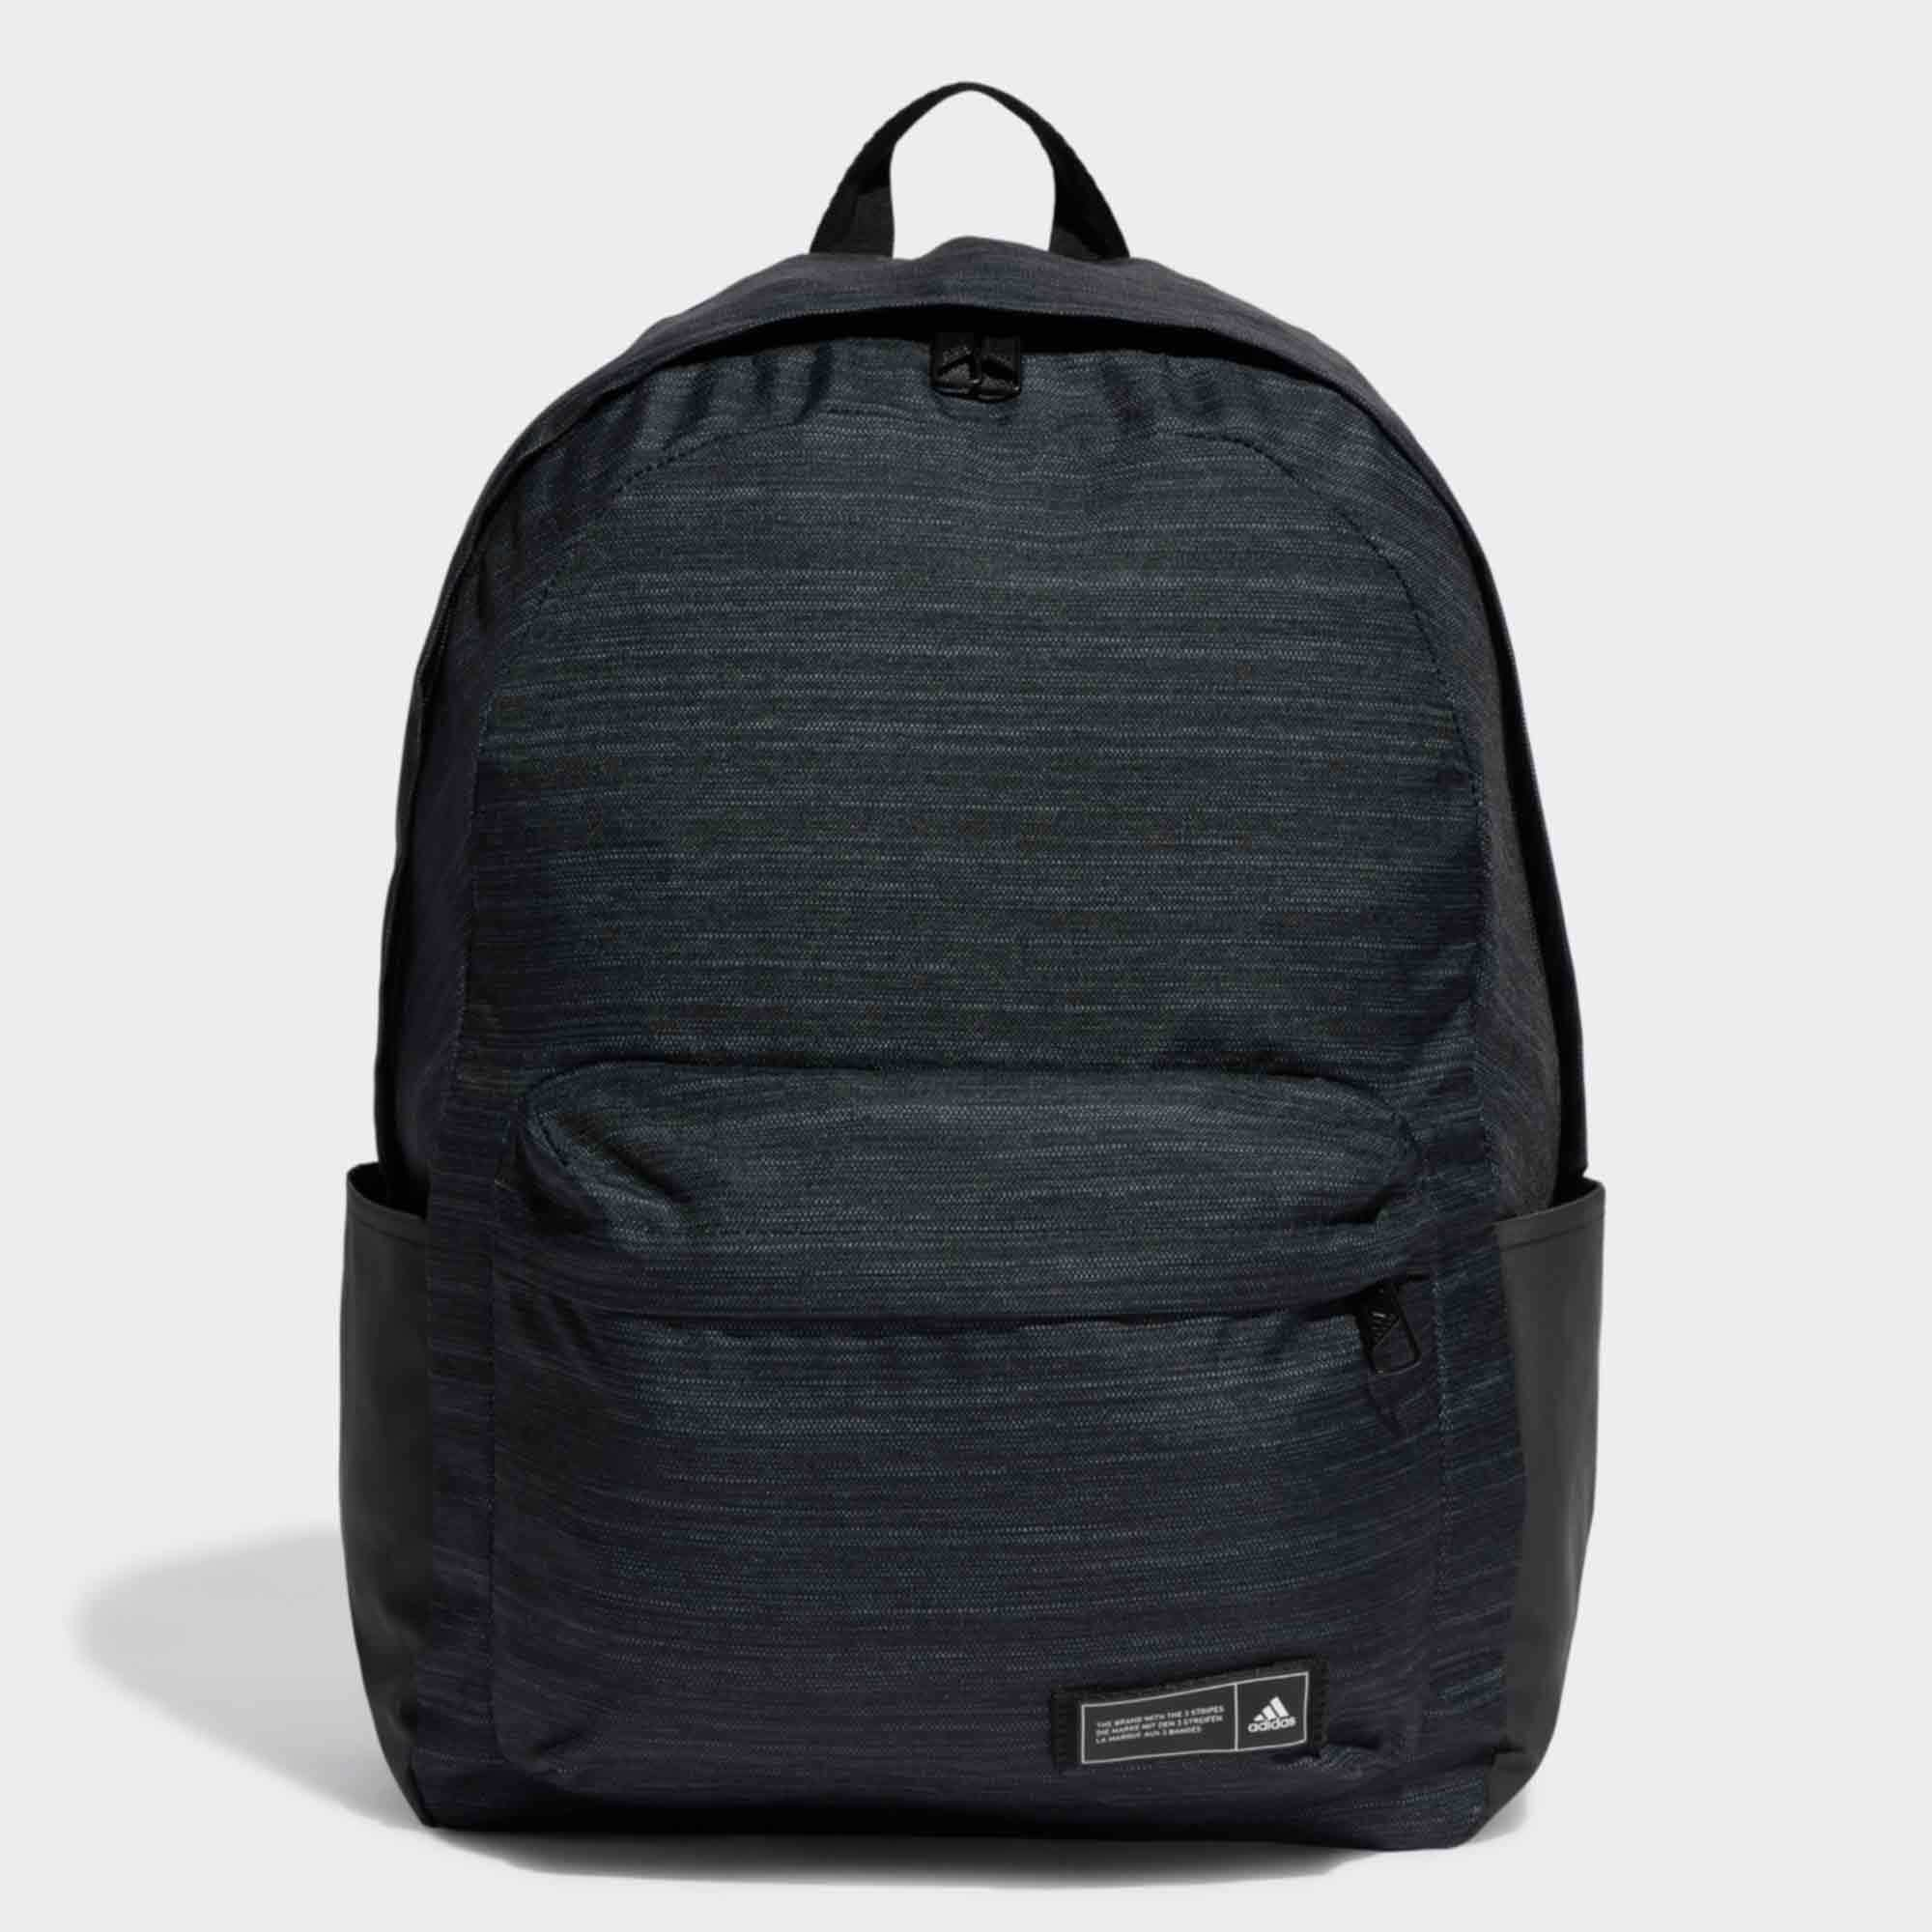 adidas Attitude Classic Backpack Black/Grey/White 27 Litres